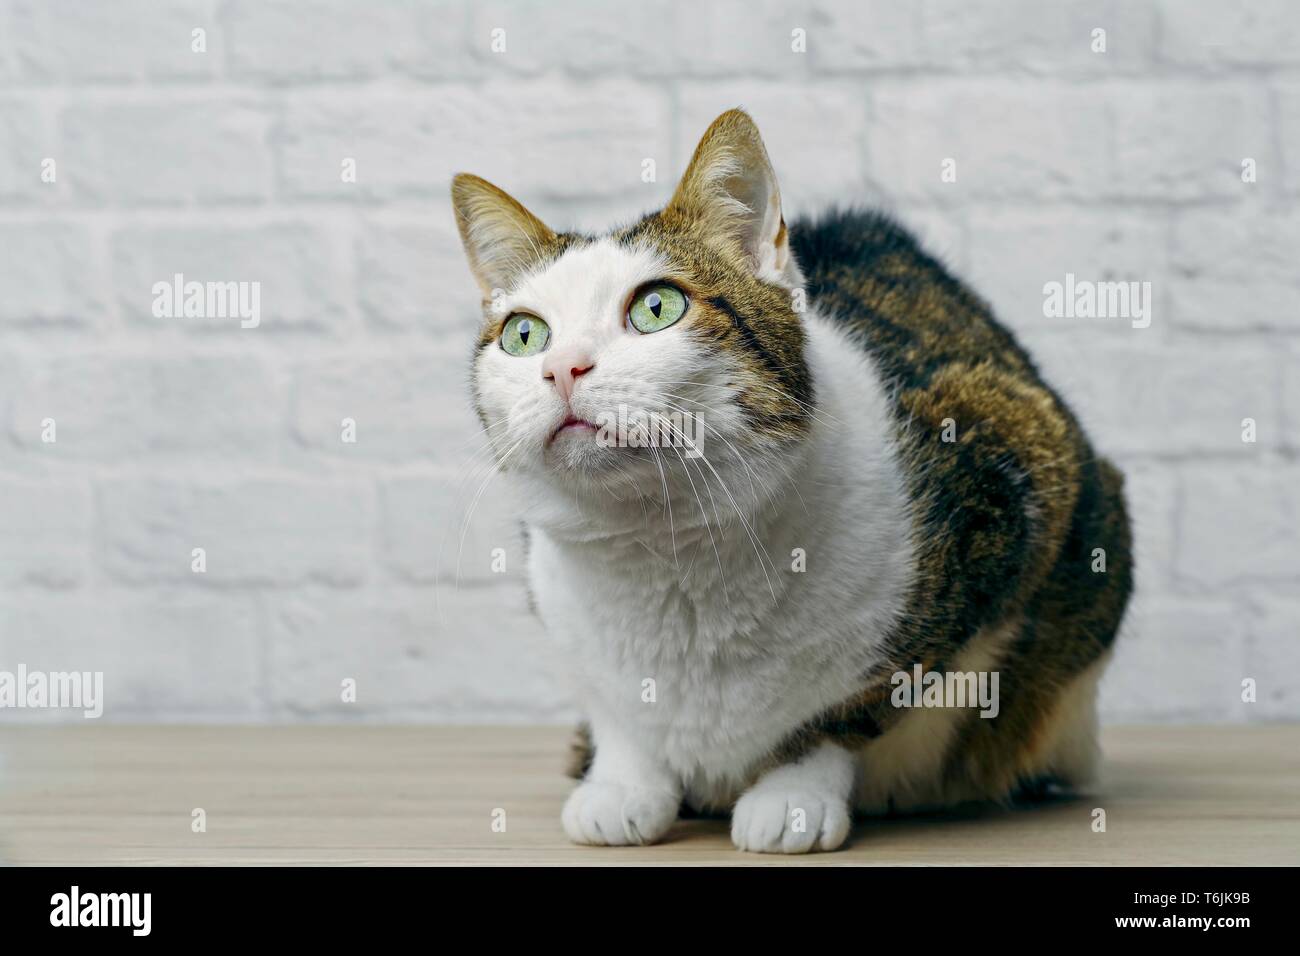 Tabby cat looking curious away. Horizontal image with copy space. Stock Photo